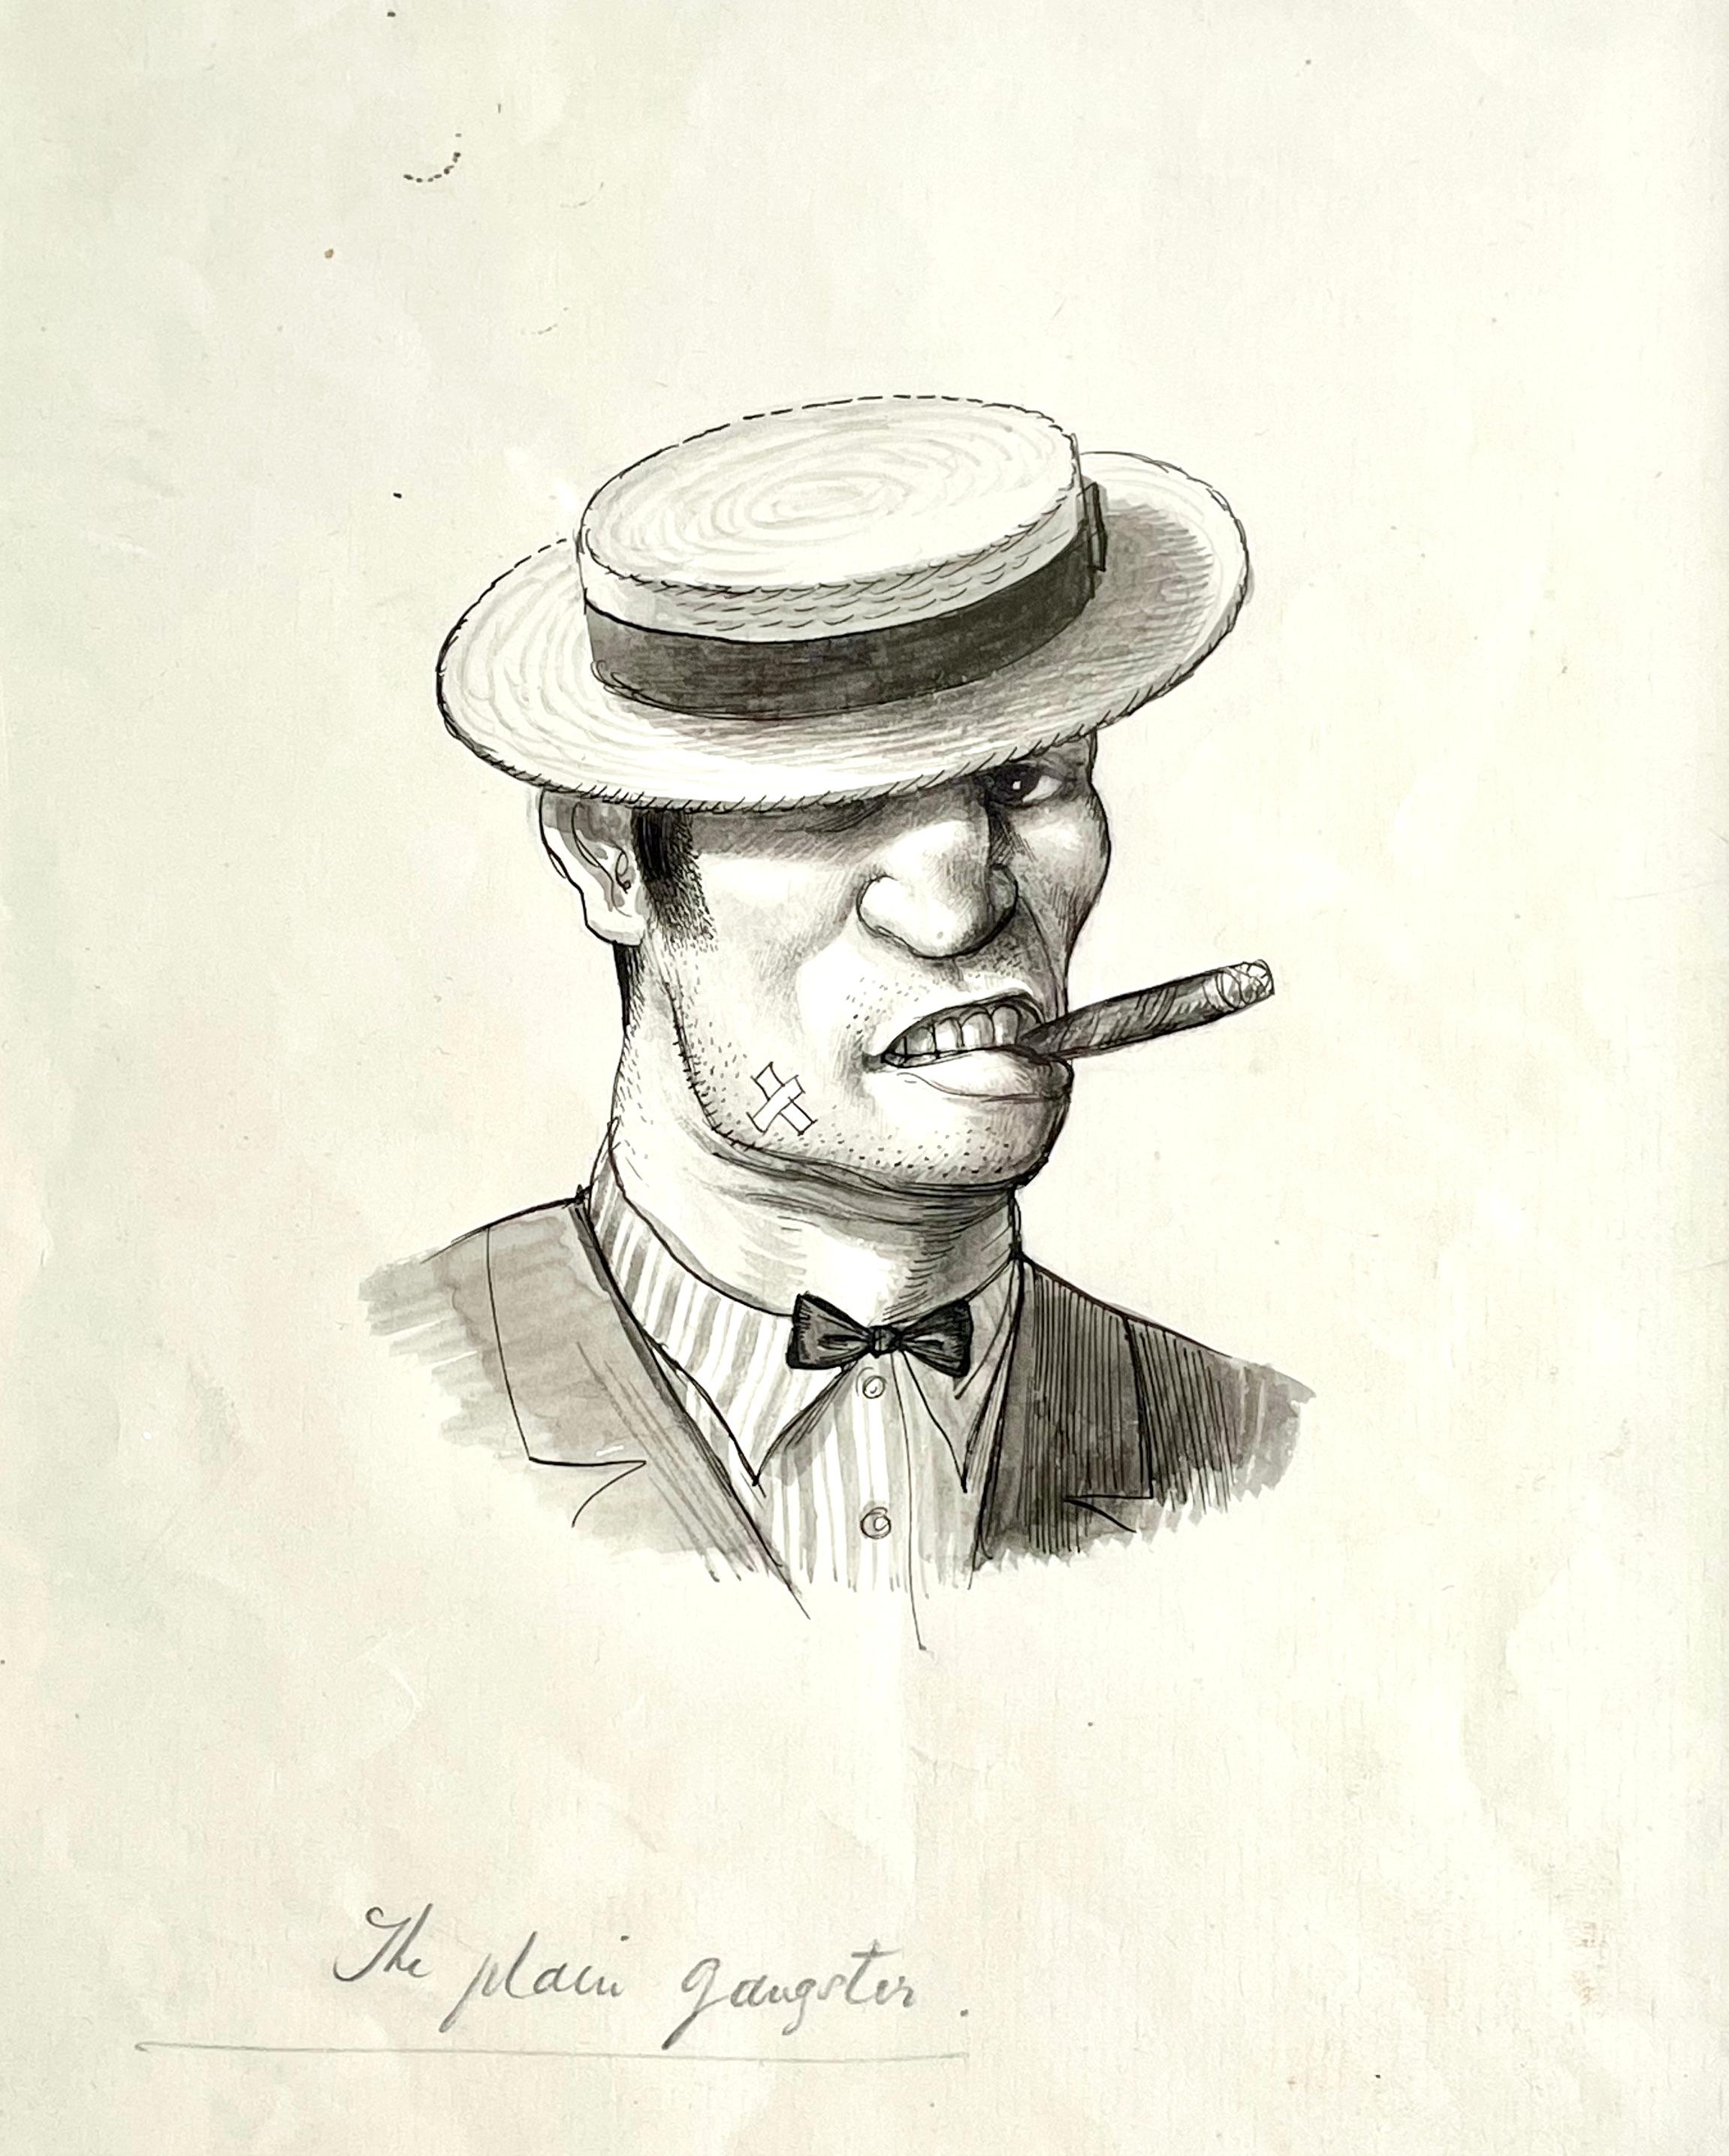 The Plain Gangster - Early 20th Century British Illustration by Rex Whistler